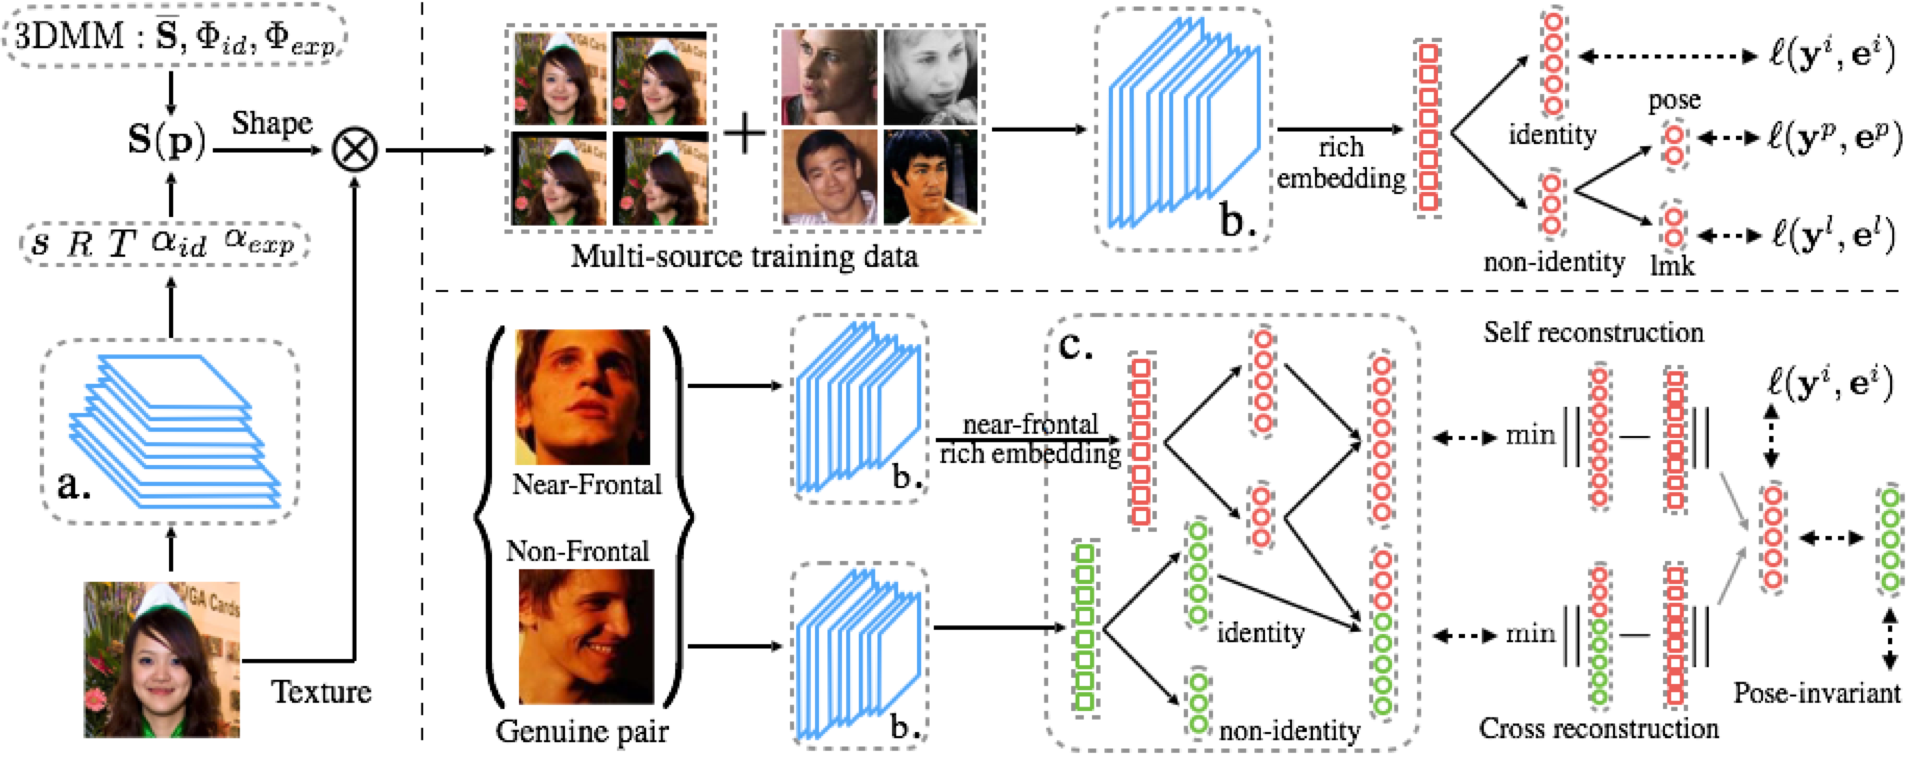 Reconstruction-Based Disentanglement for Pose-Invariant Face Recognition